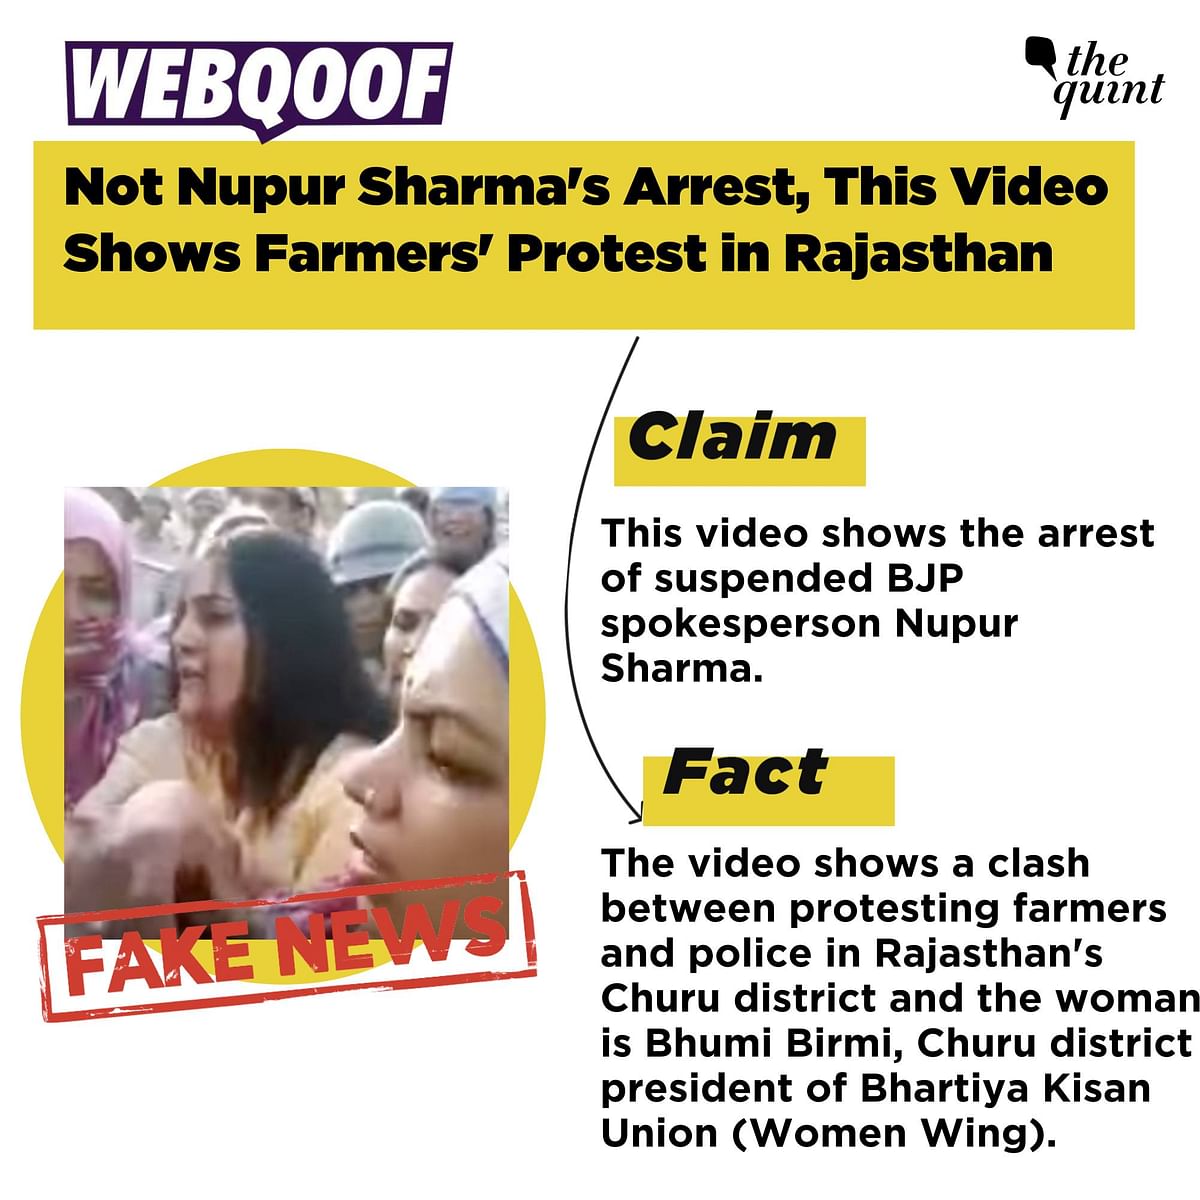 Old videos were also falsely linked to the Assam floods and Agnipath protests this week.